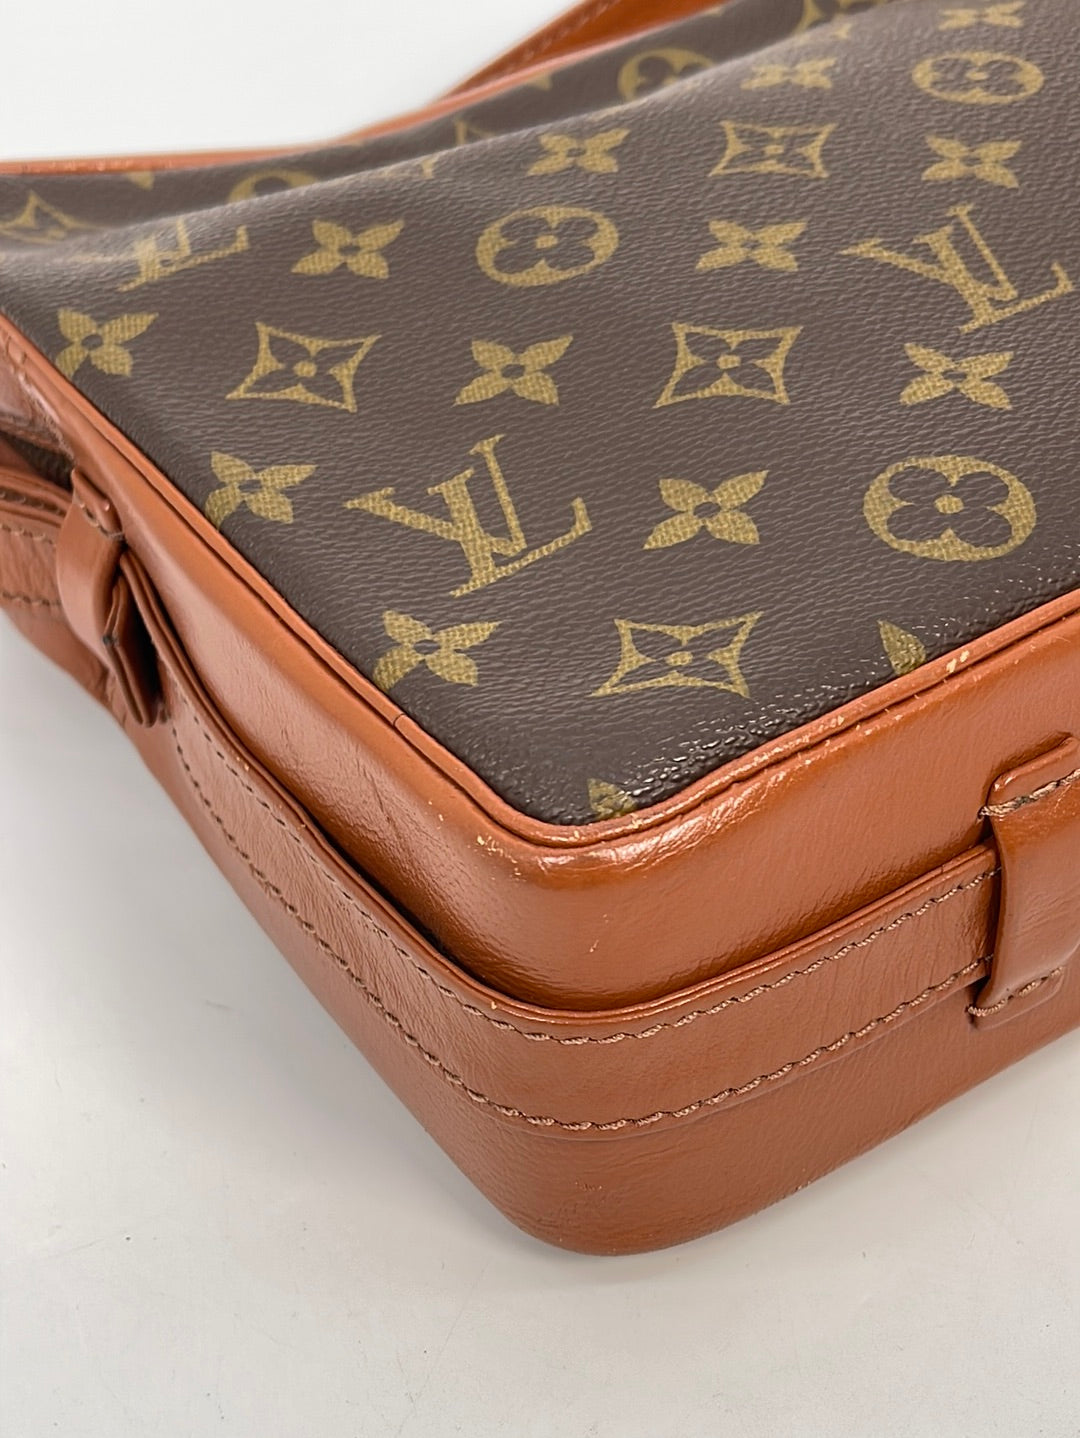 Pre-Owned Louis Vuitton Sac Bandouliere 30-2235 RY71 